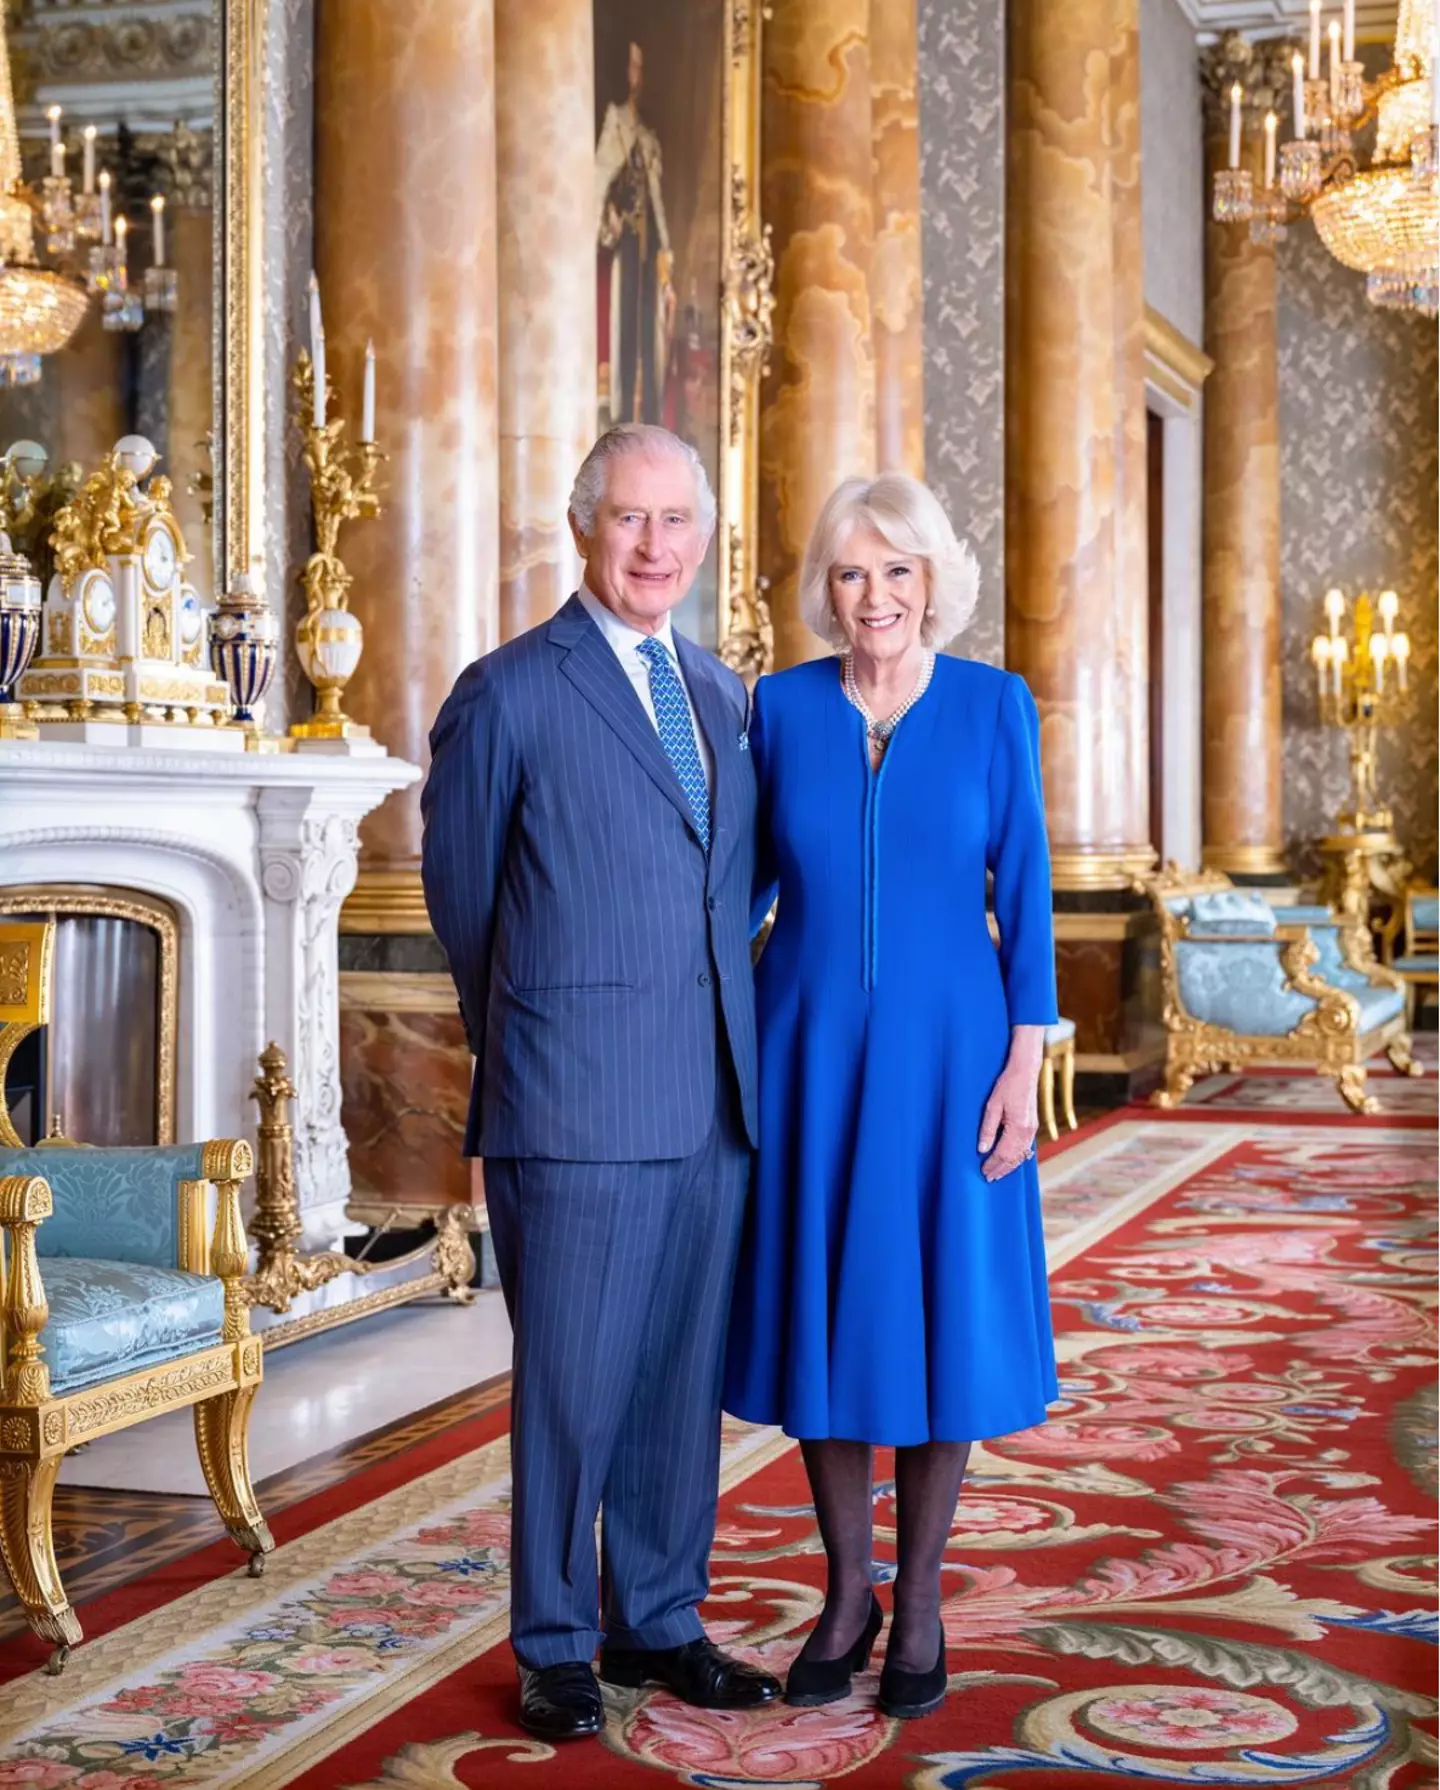 Camilla will be crowned alongside Charles at the coronation.